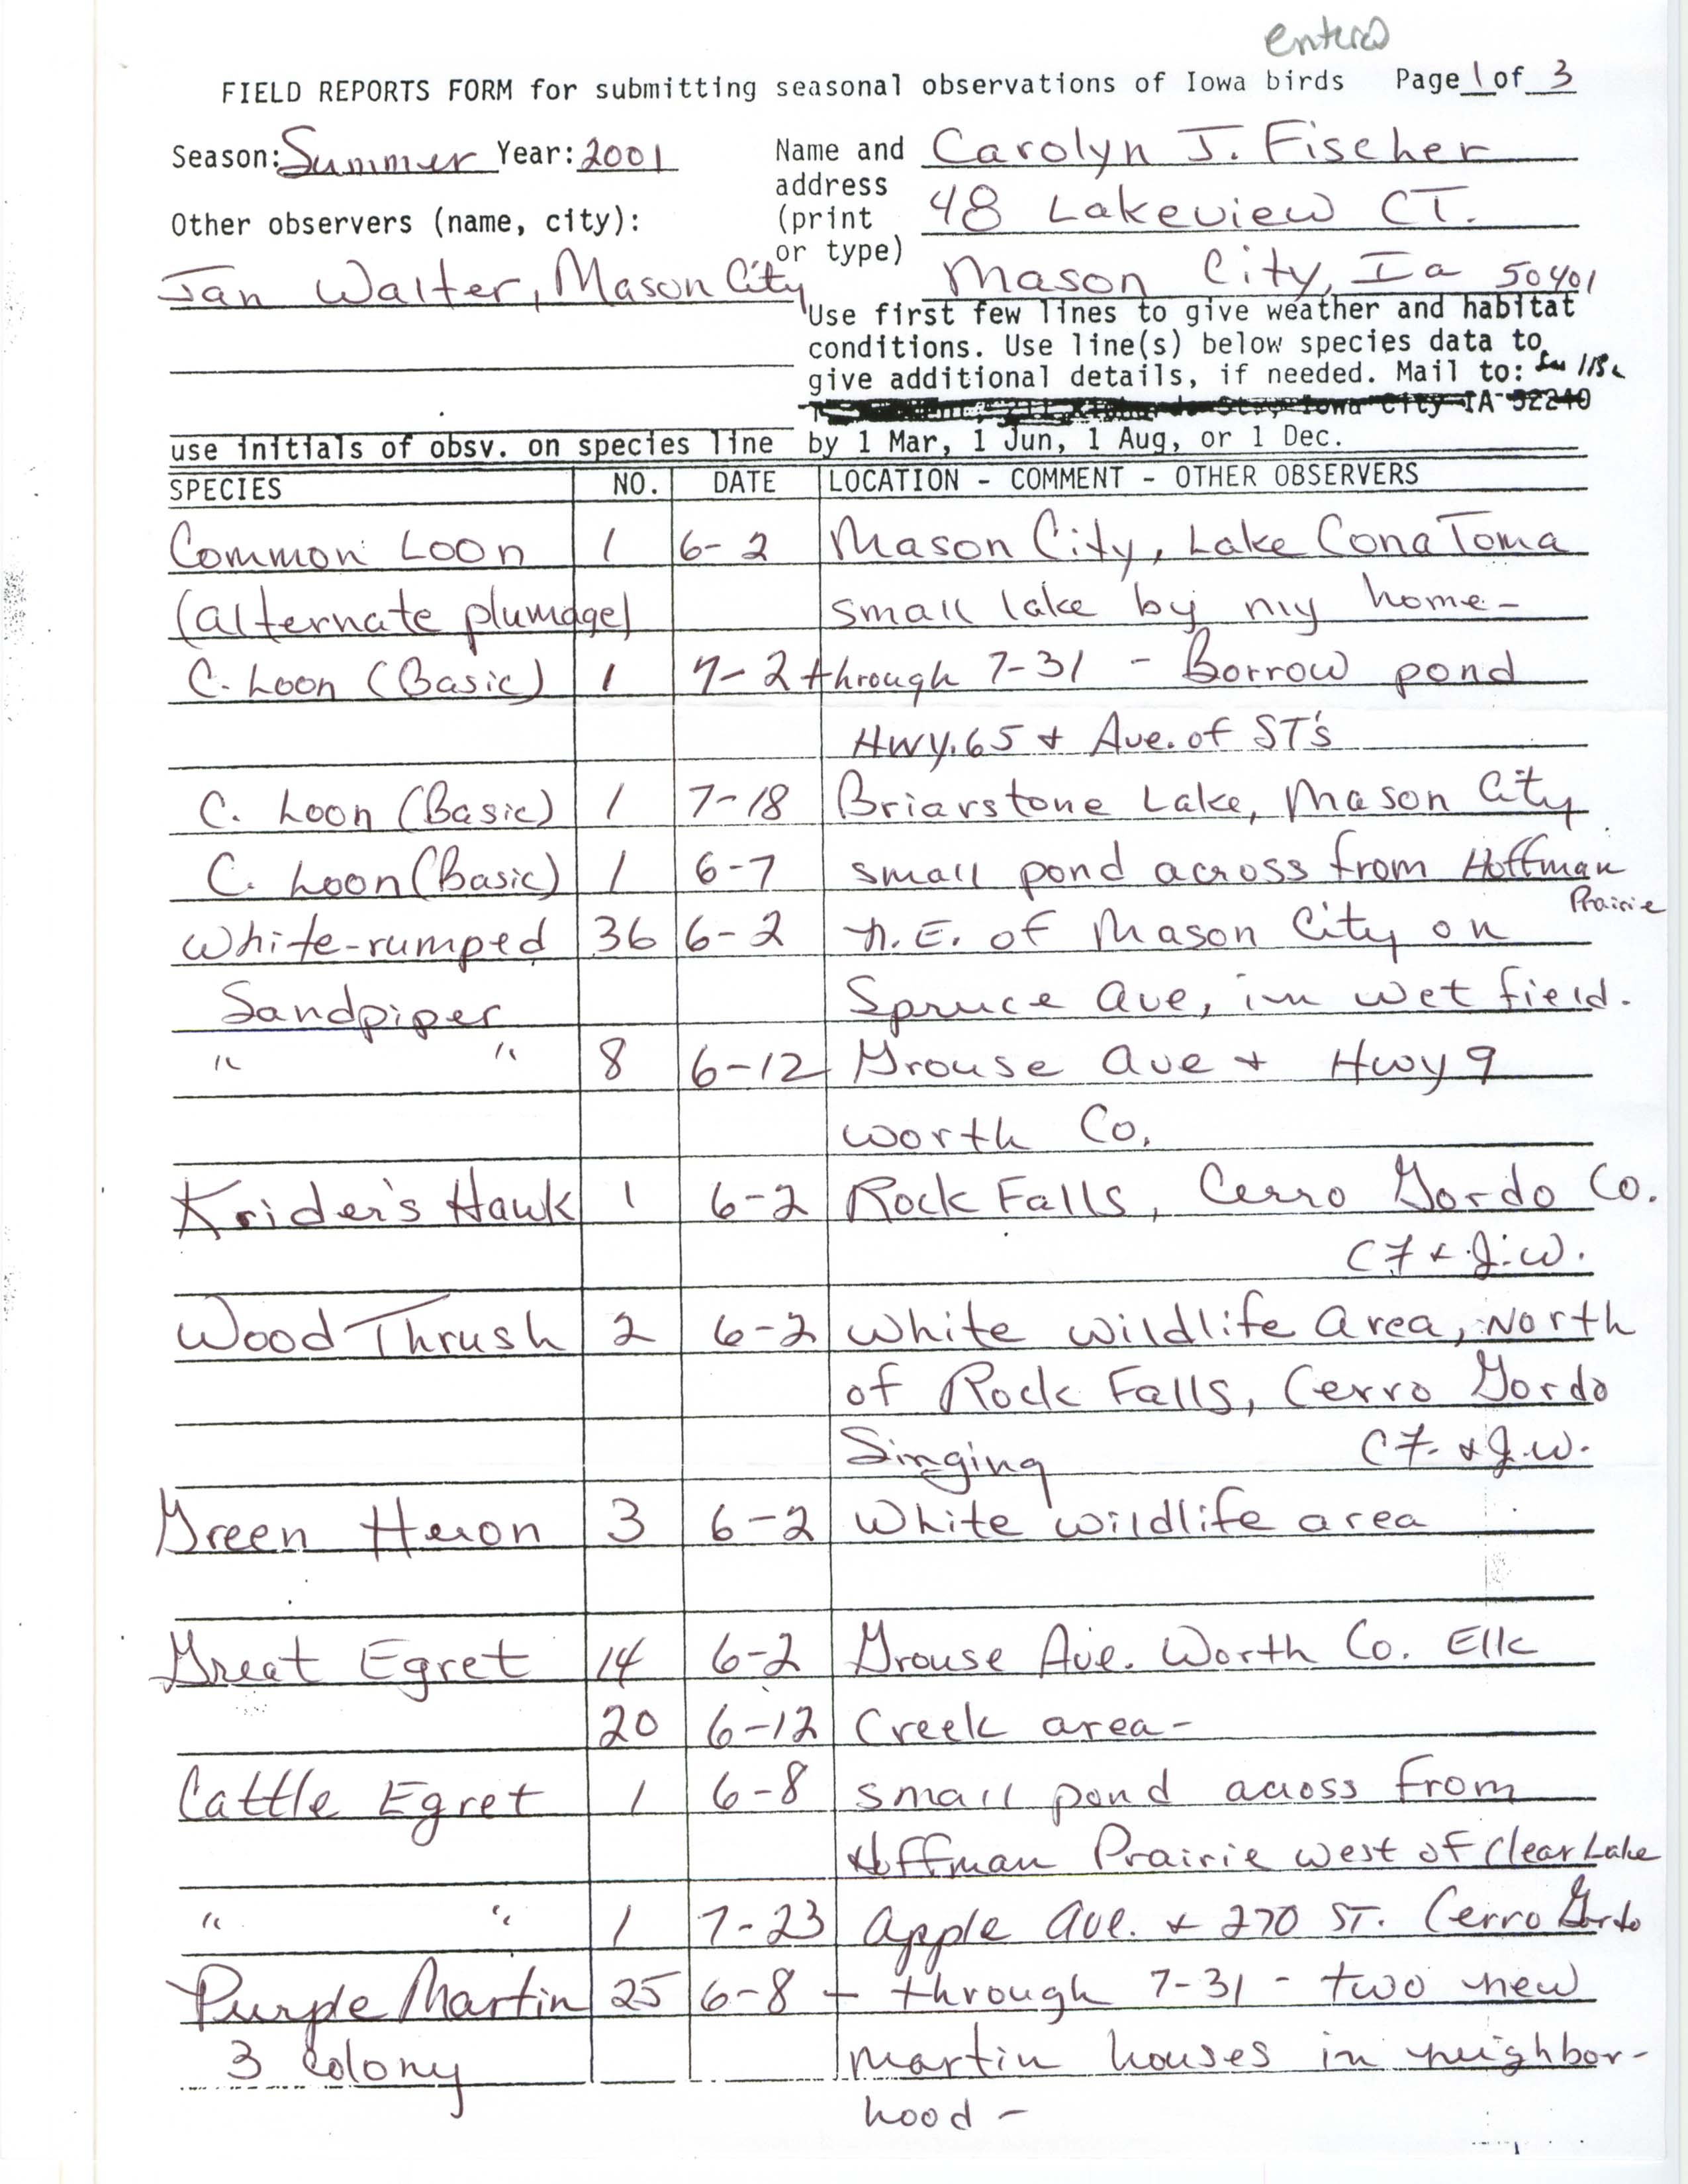 Field reports form for submitting seasonal observations of Iowa birds, Carolyn J. Fischer, summer 2001